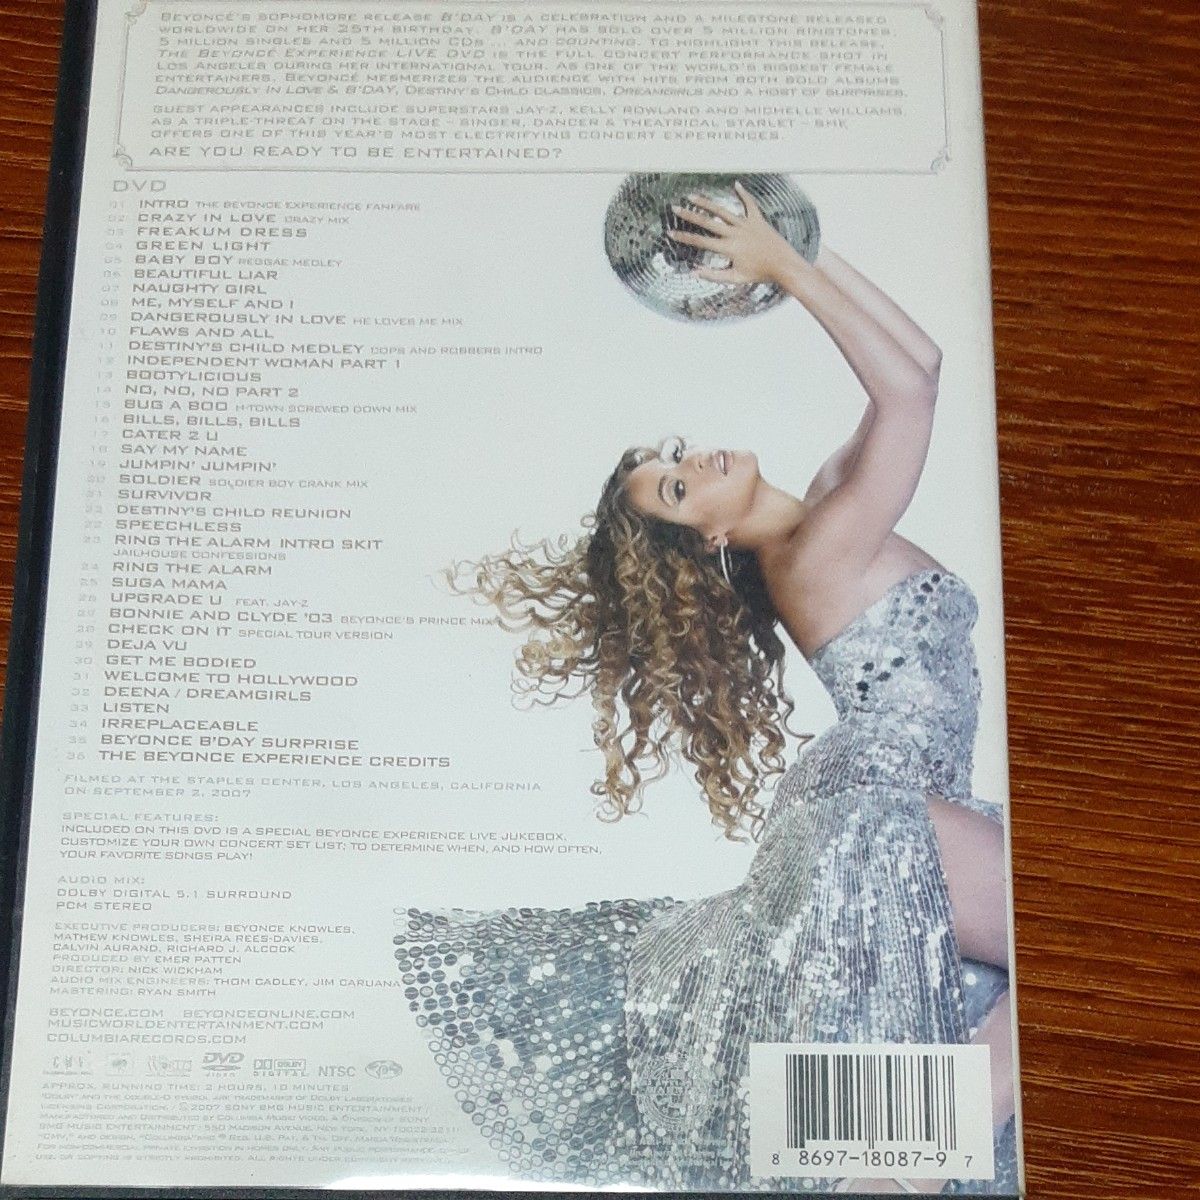 Beyonce THE BEYONCE EXPERIENCE LIVE DVD 中古品